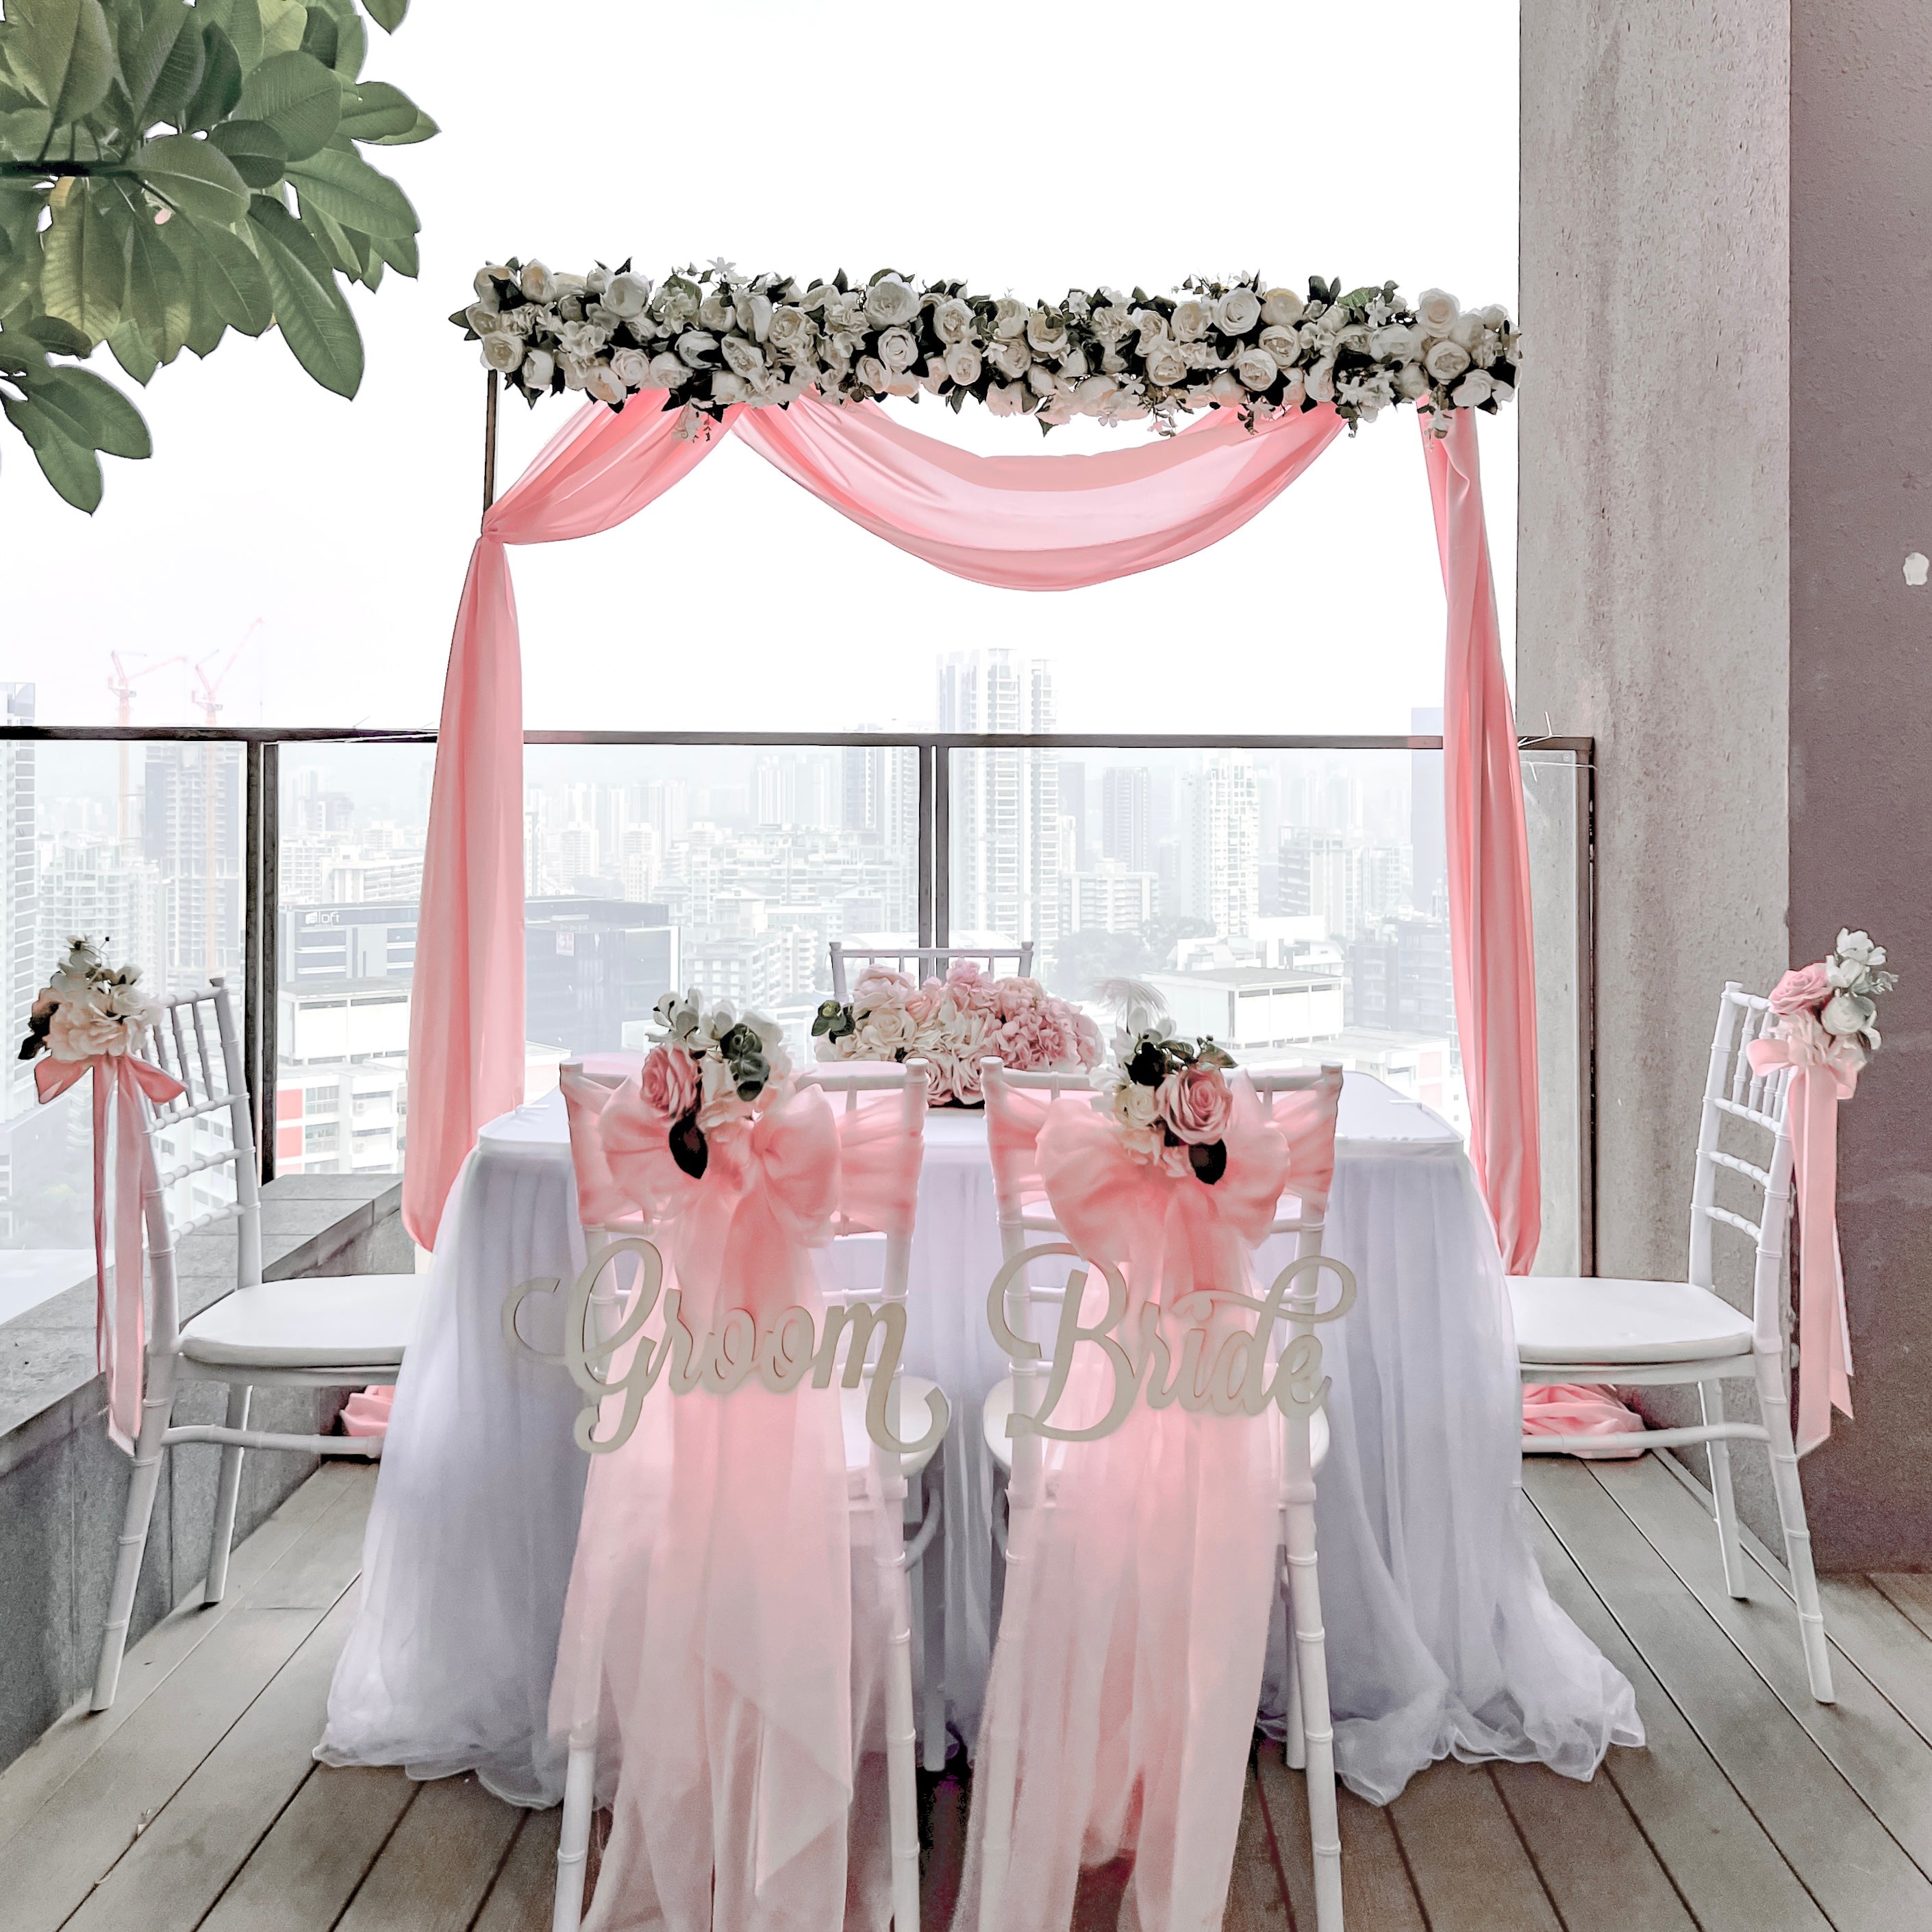 Sweet and Simple Outdoor Solemnisation/ROM Decor in Singapore - Pink & White Theme with Fairy-lights